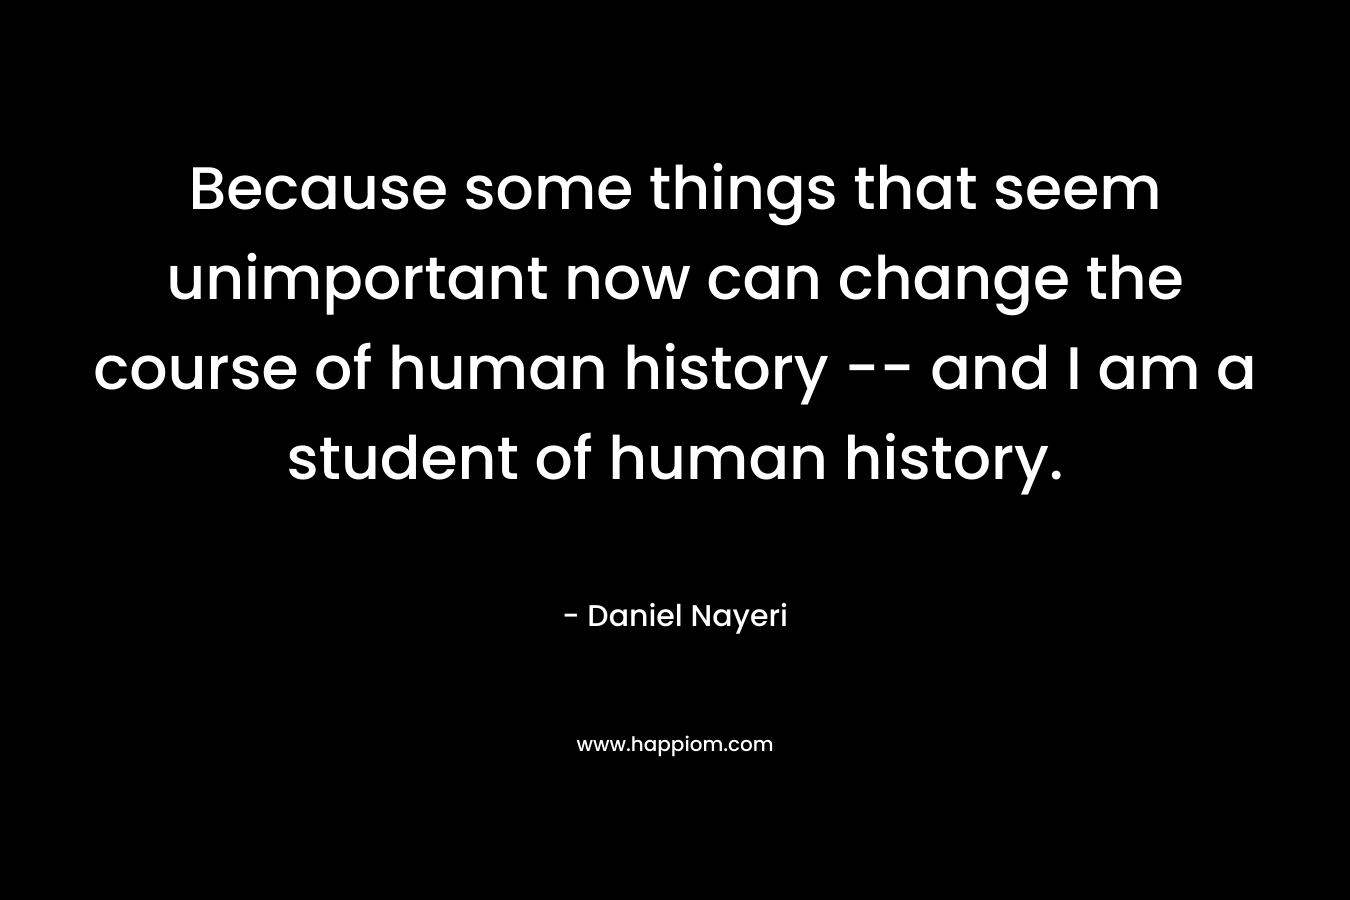 Because some things that seem unimportant now can change the course of human history -- and I am a student of human history.